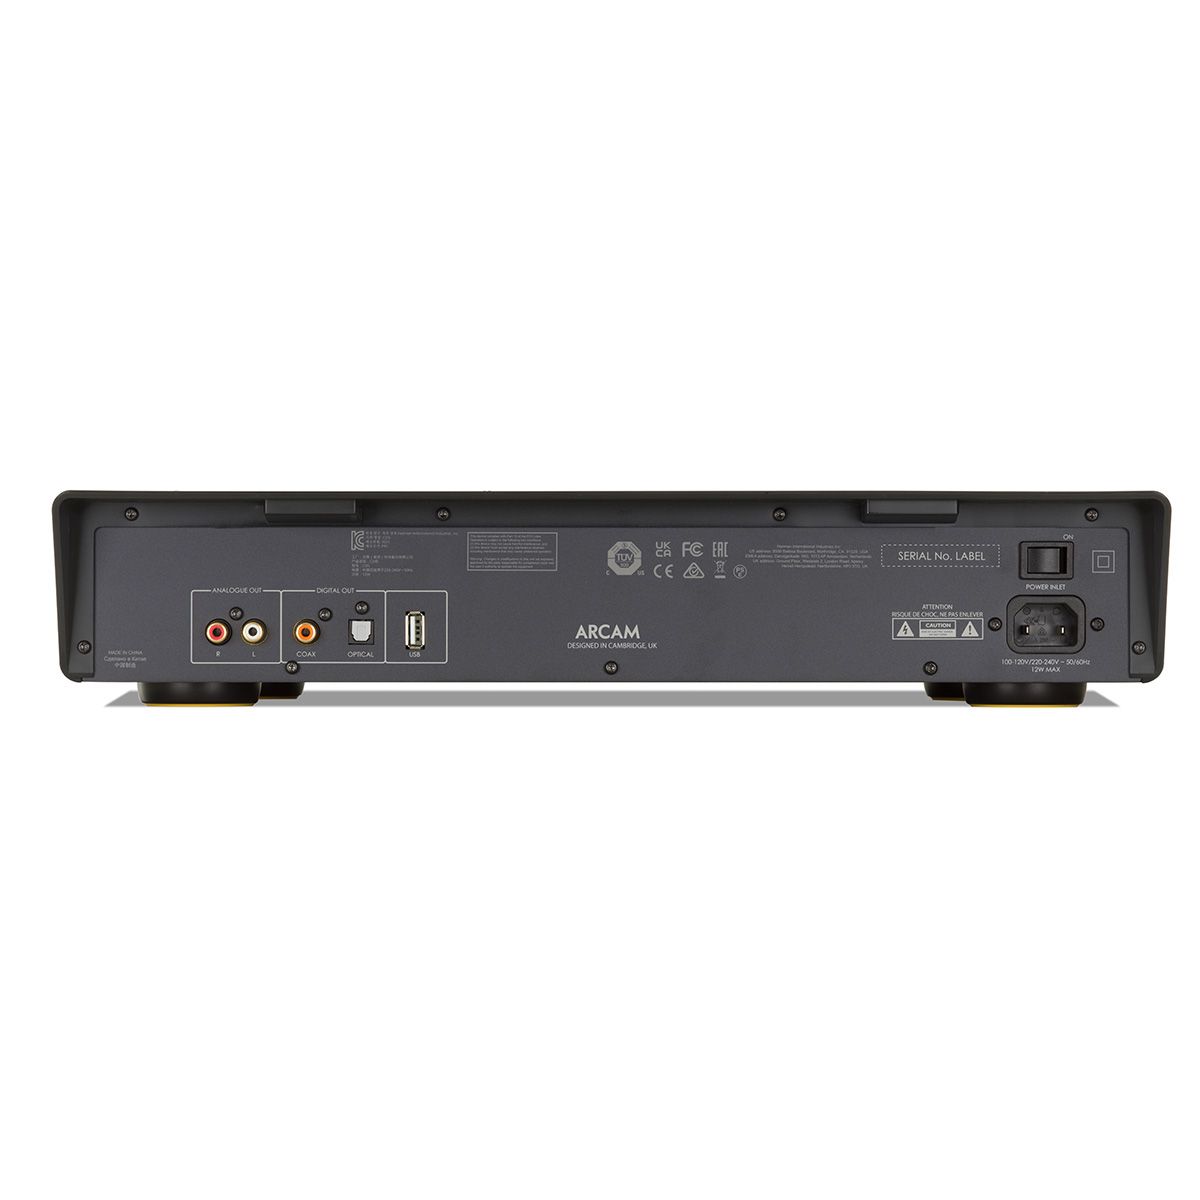 Arcam CD5 Compact Disc Player rear view